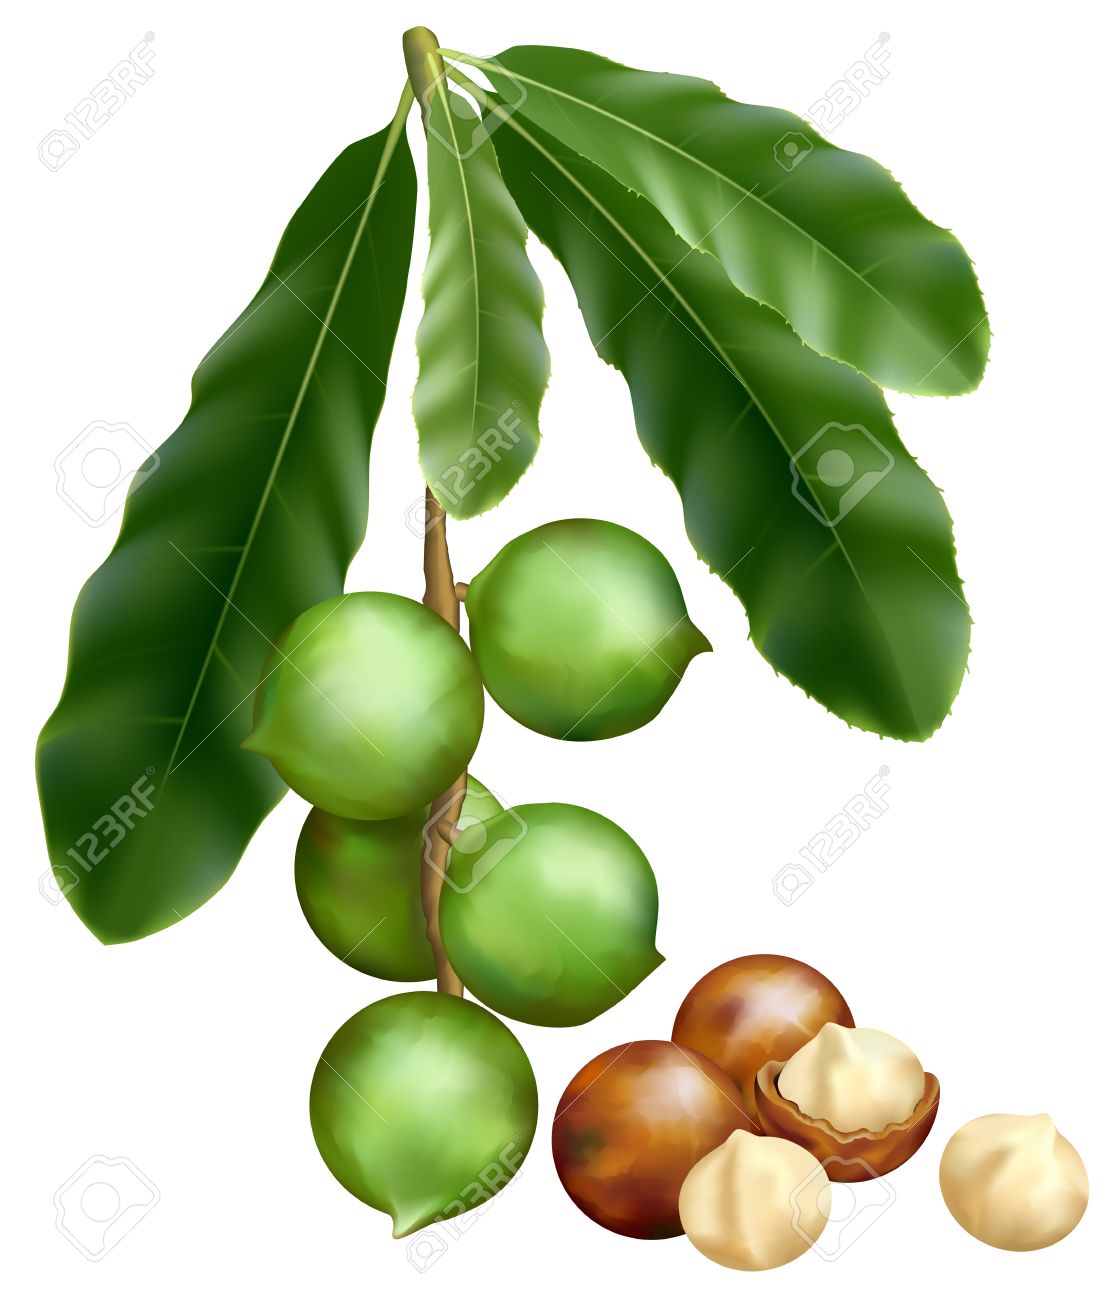 361 Macadamia Nut Stock Vector Illustration And Royalty Free.